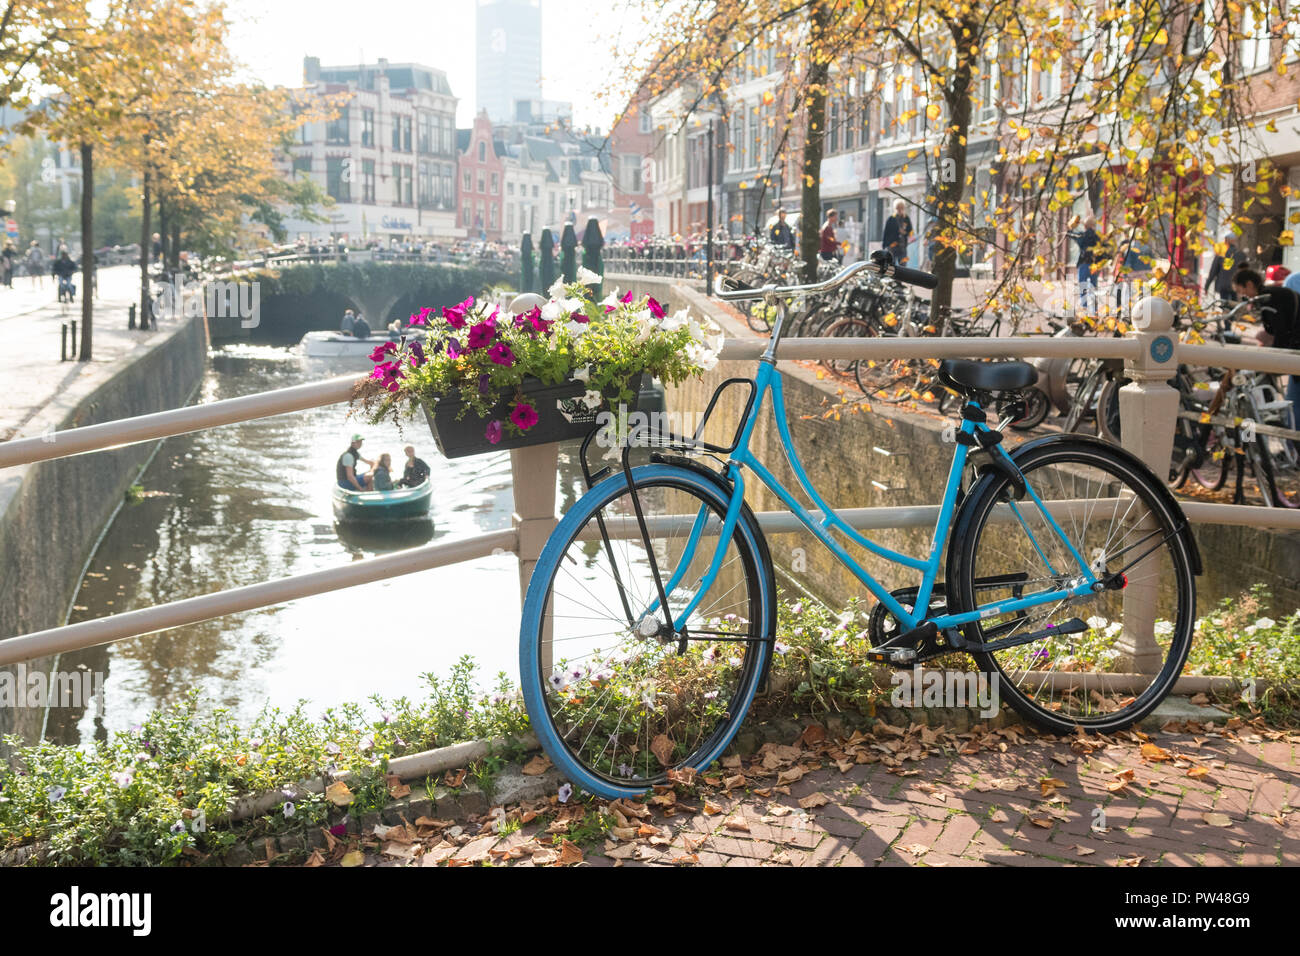 Leeuwarden, Friesland, Netherlands - dutch bicycle on a bridge over a canal Stock Photo